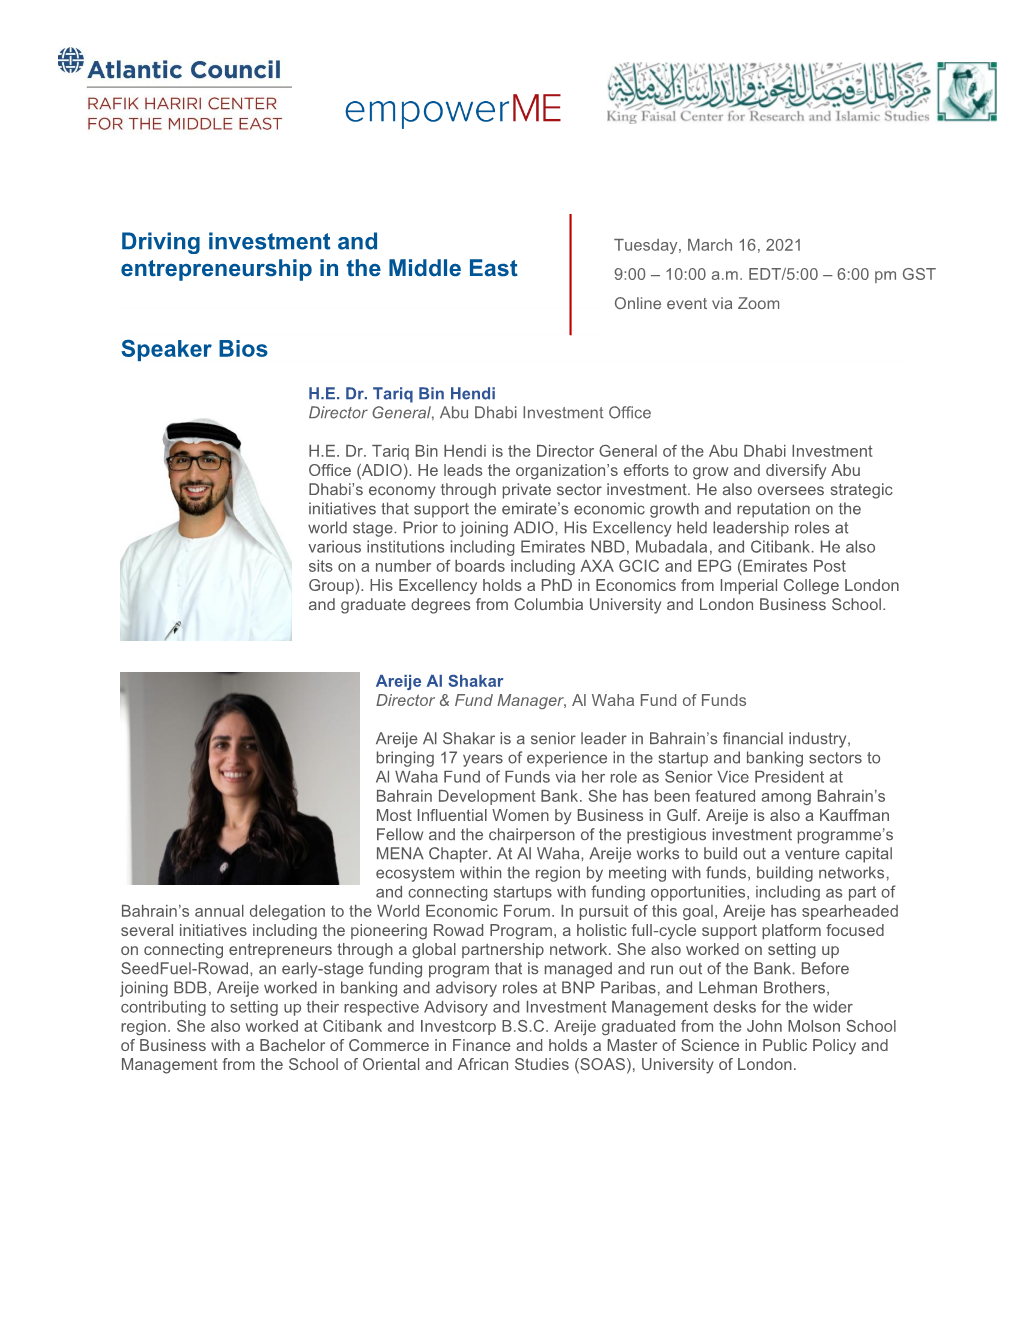 Driving Investment and Entrepreneurship in the Middle East